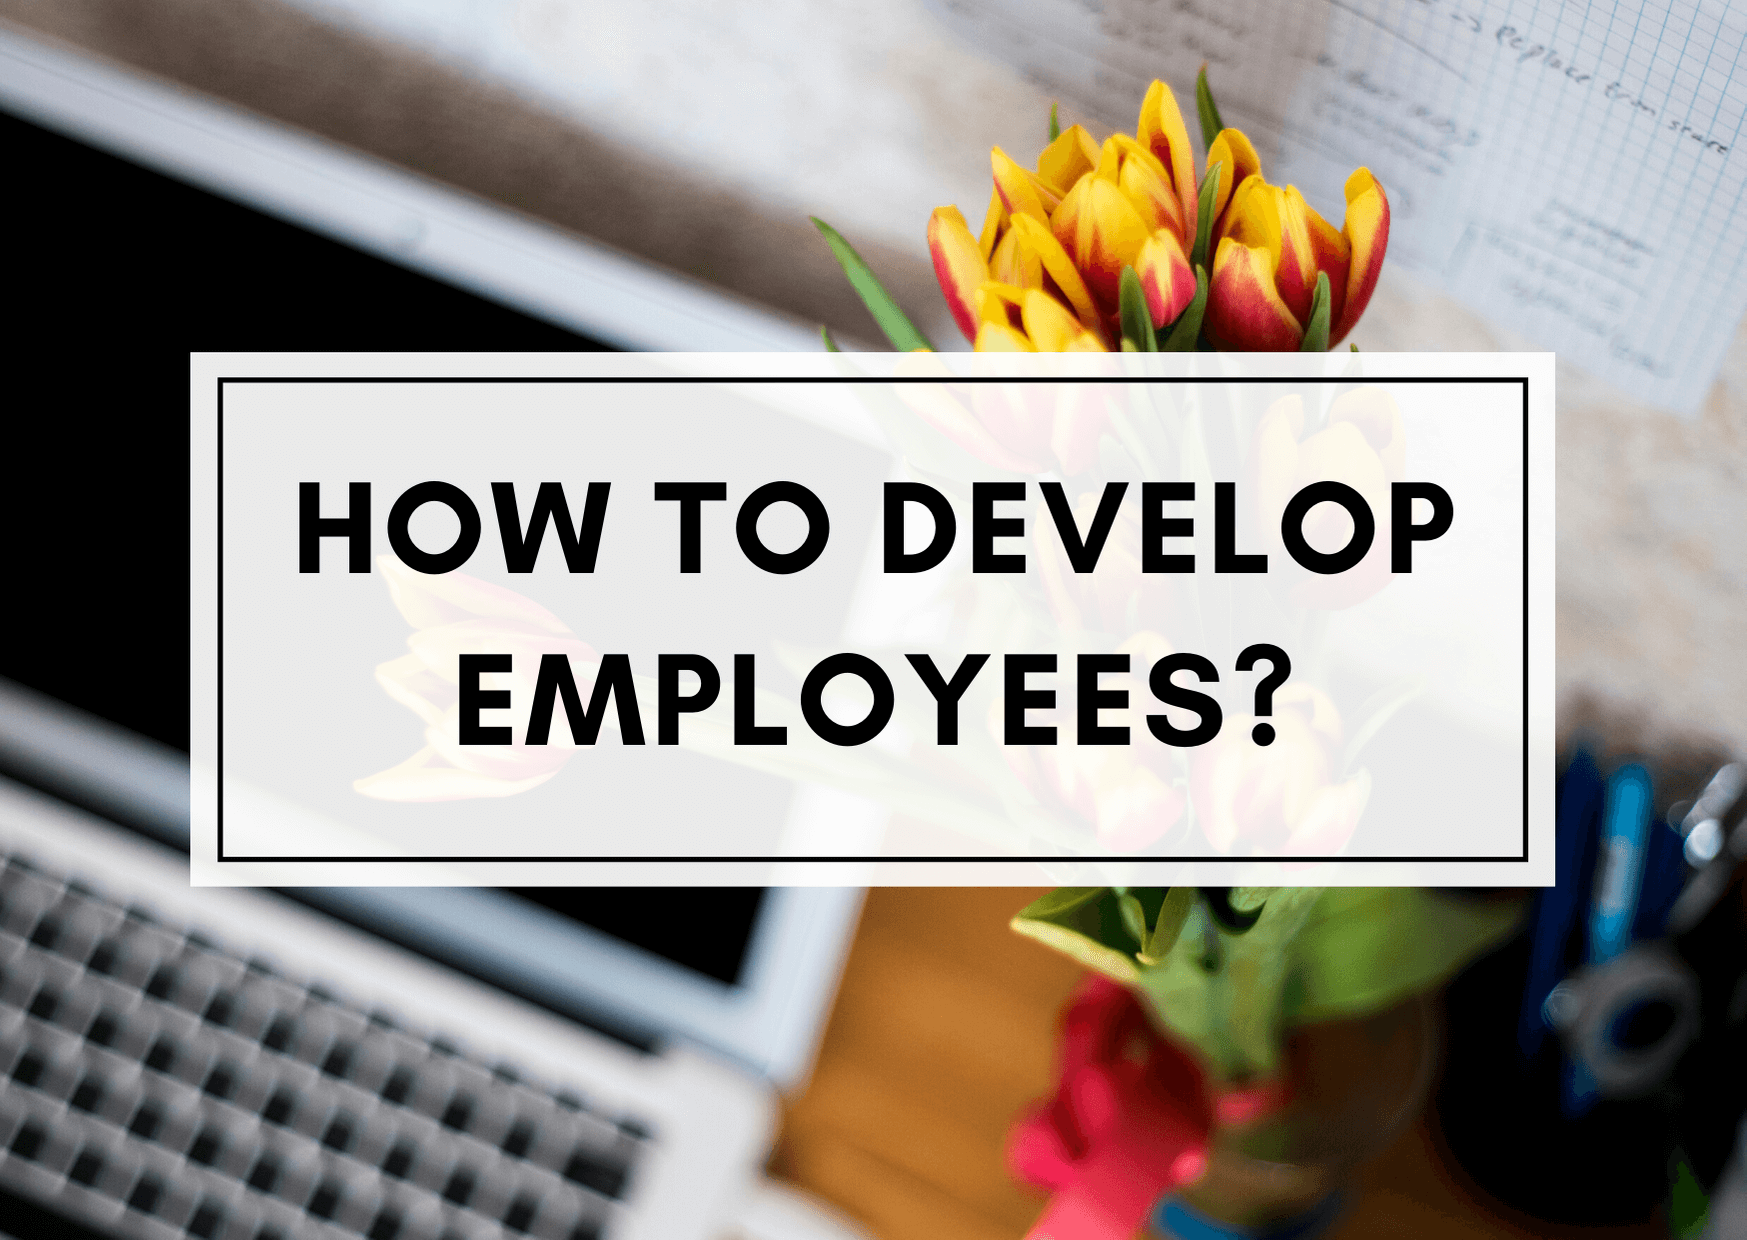 How to Develop Employees?